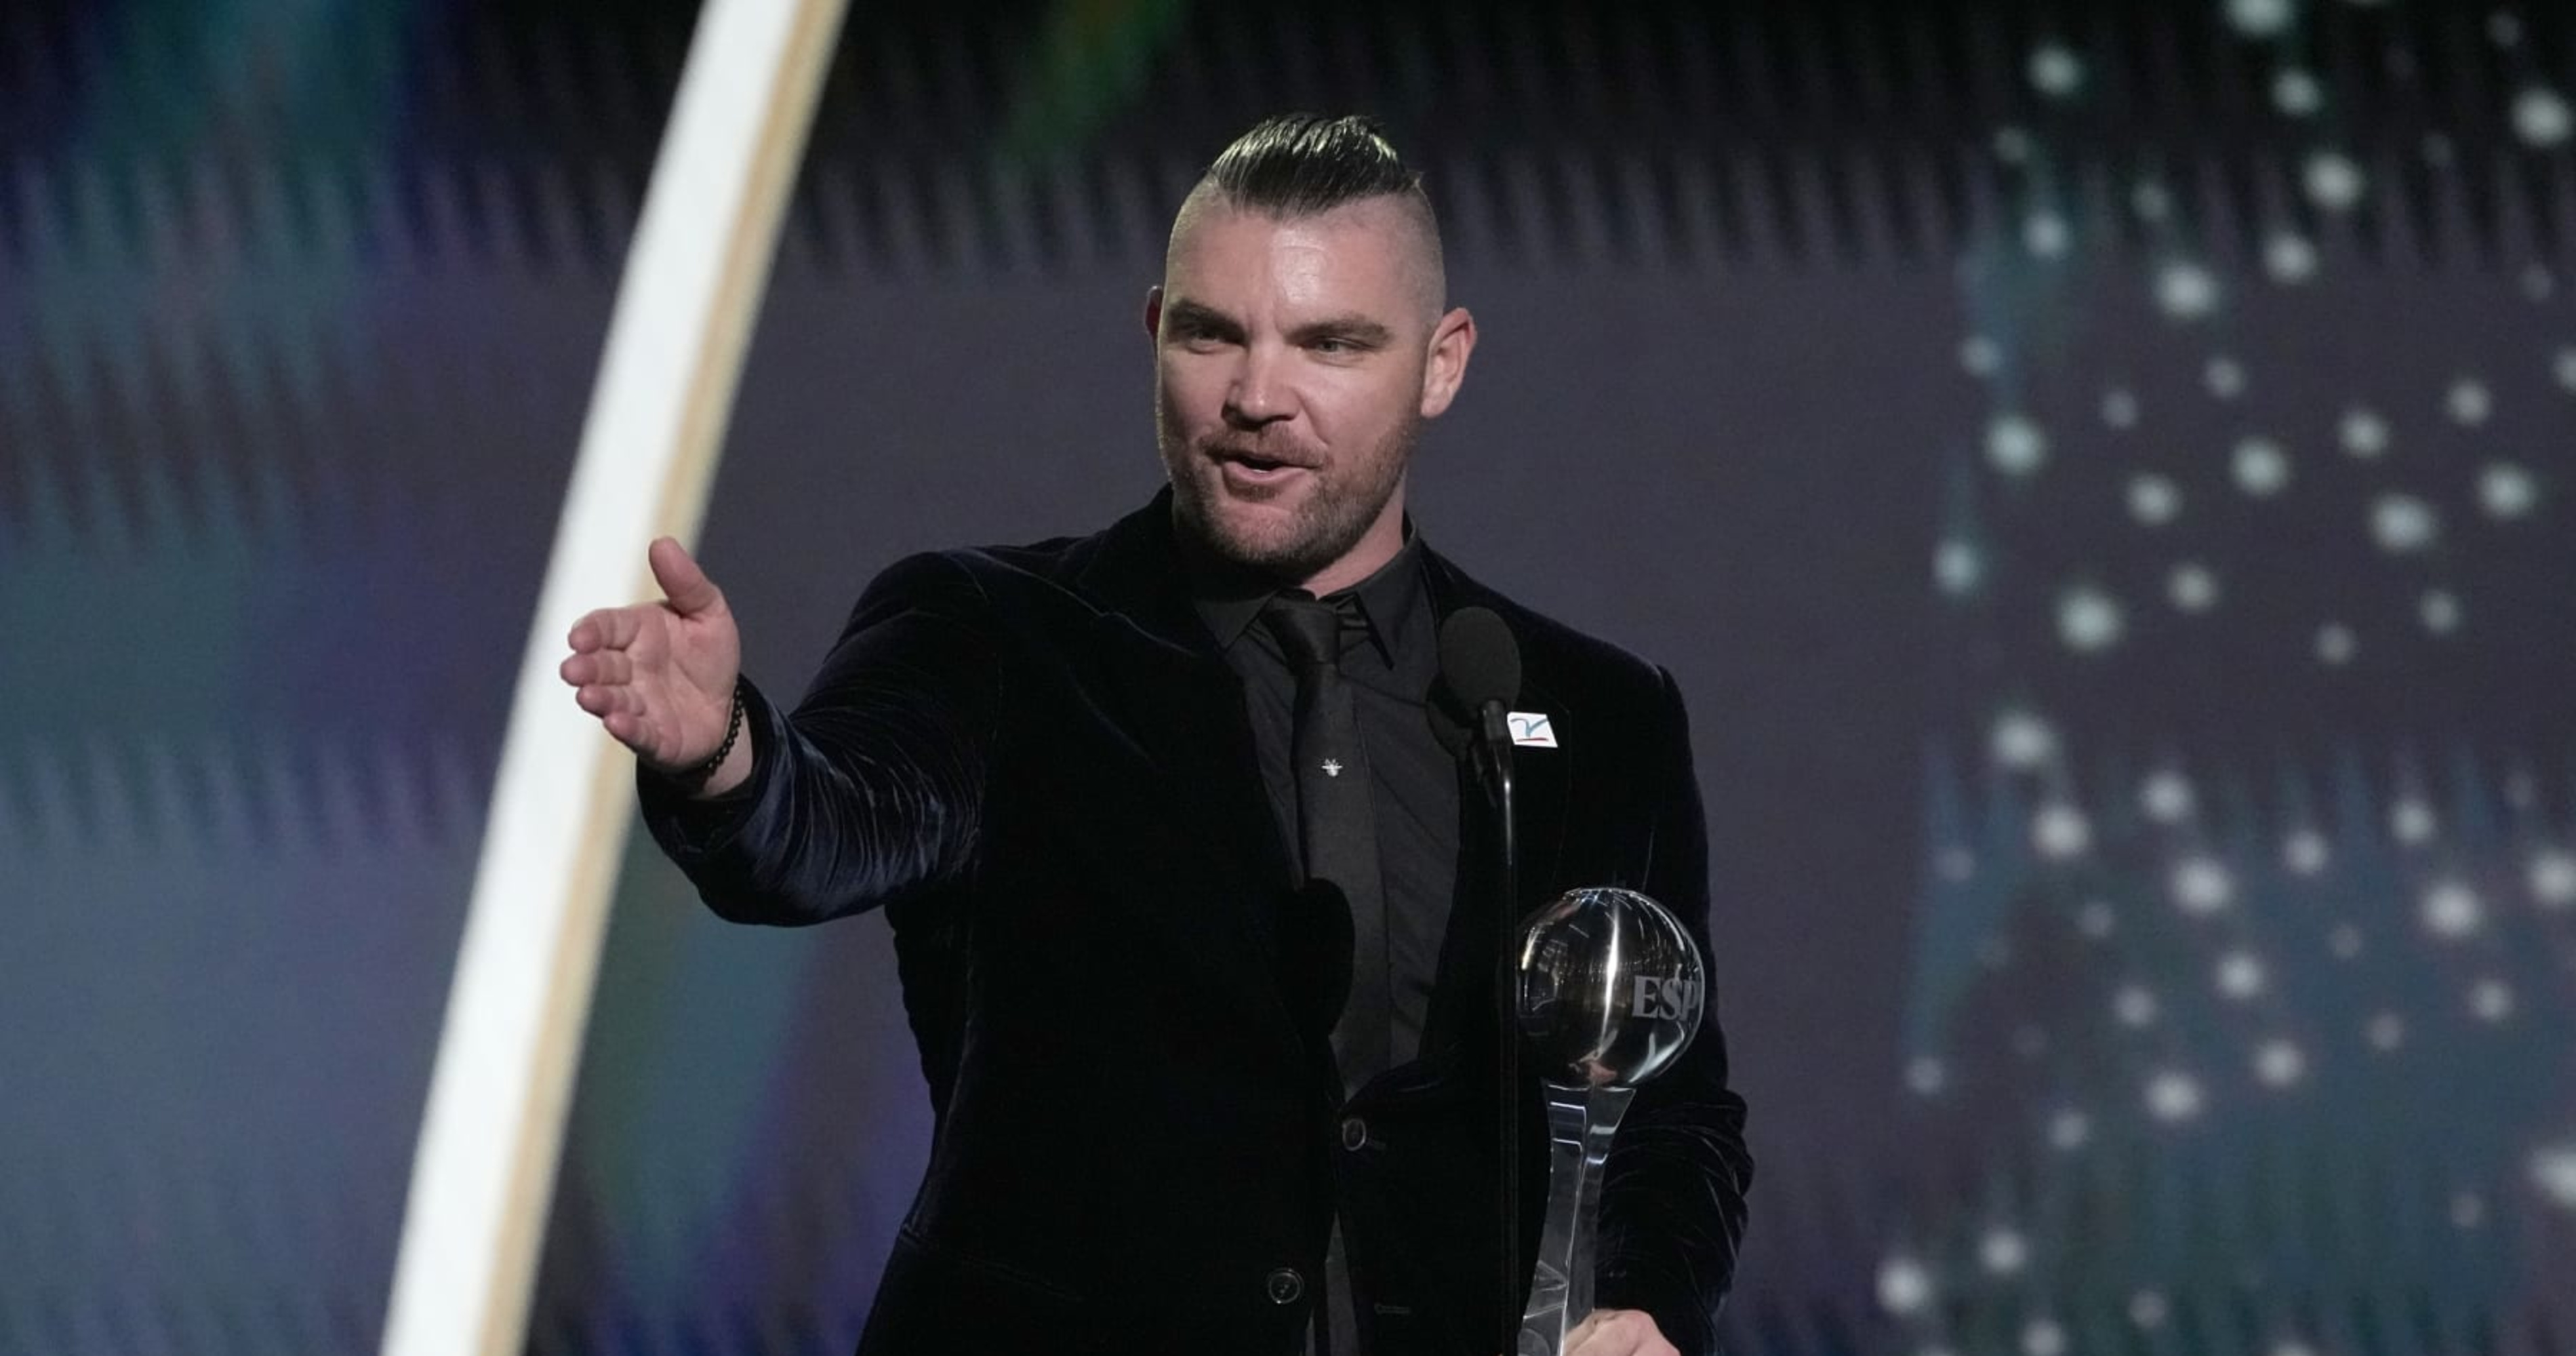 Chicago White Sox Closer Liam Hendriks Makes Awesome Speech While Receiving  the Jimmy V Award at the ESPYs - Fastball